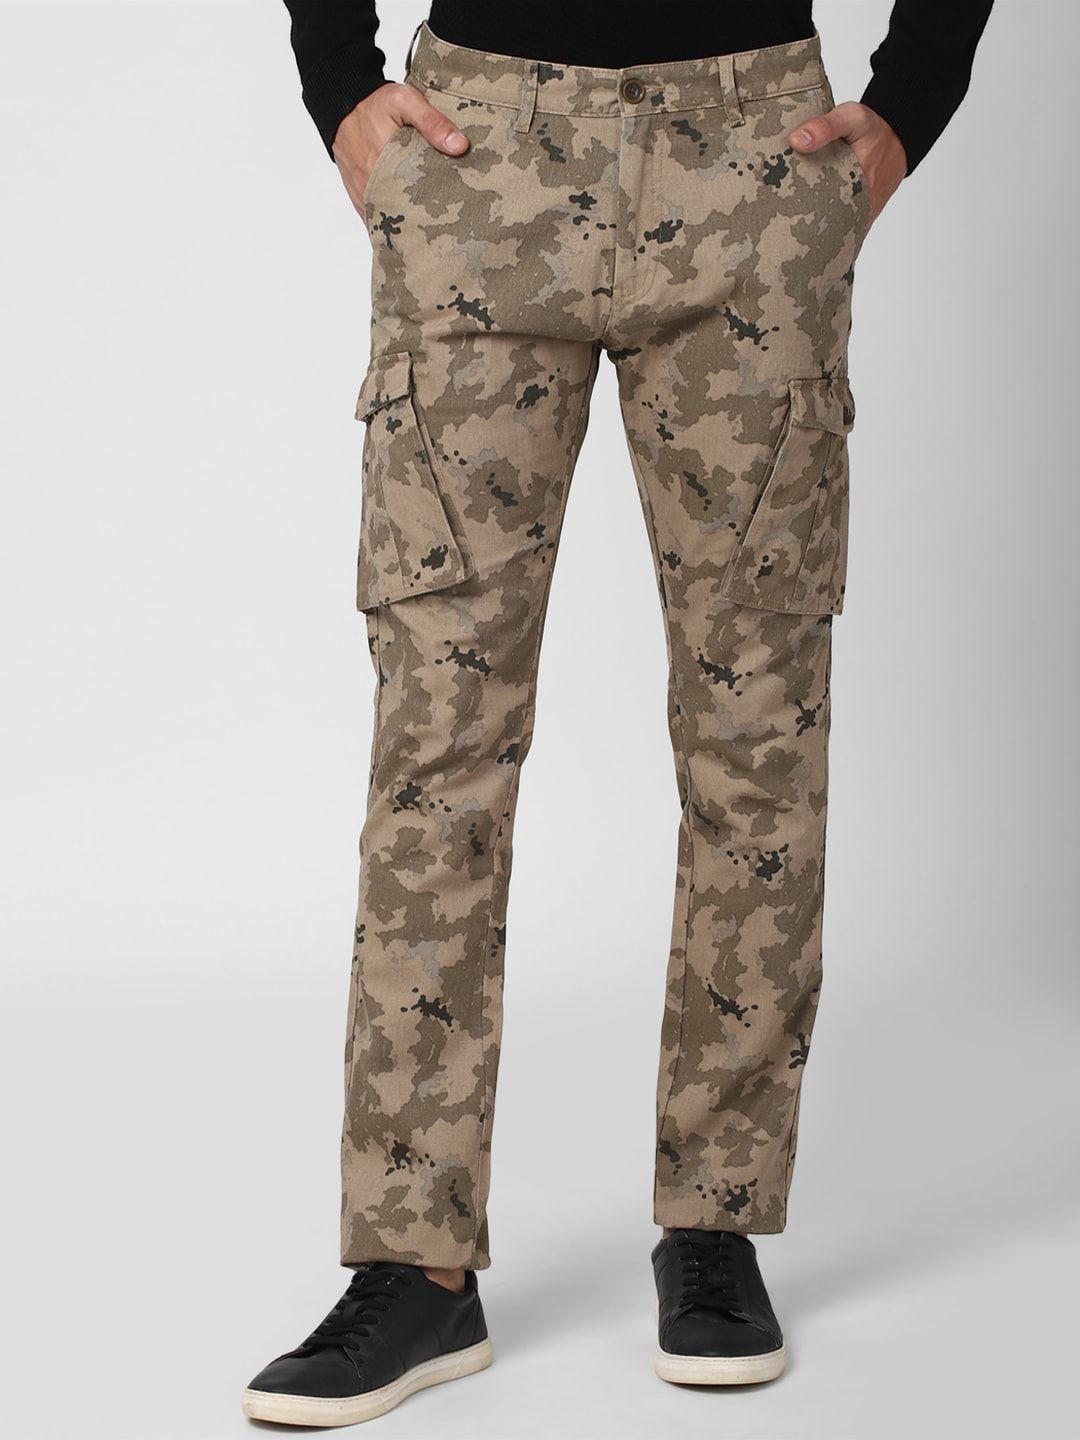 peter-england-casuals-men-brown-regular-fit-camouflage-printed-cargos-trousers